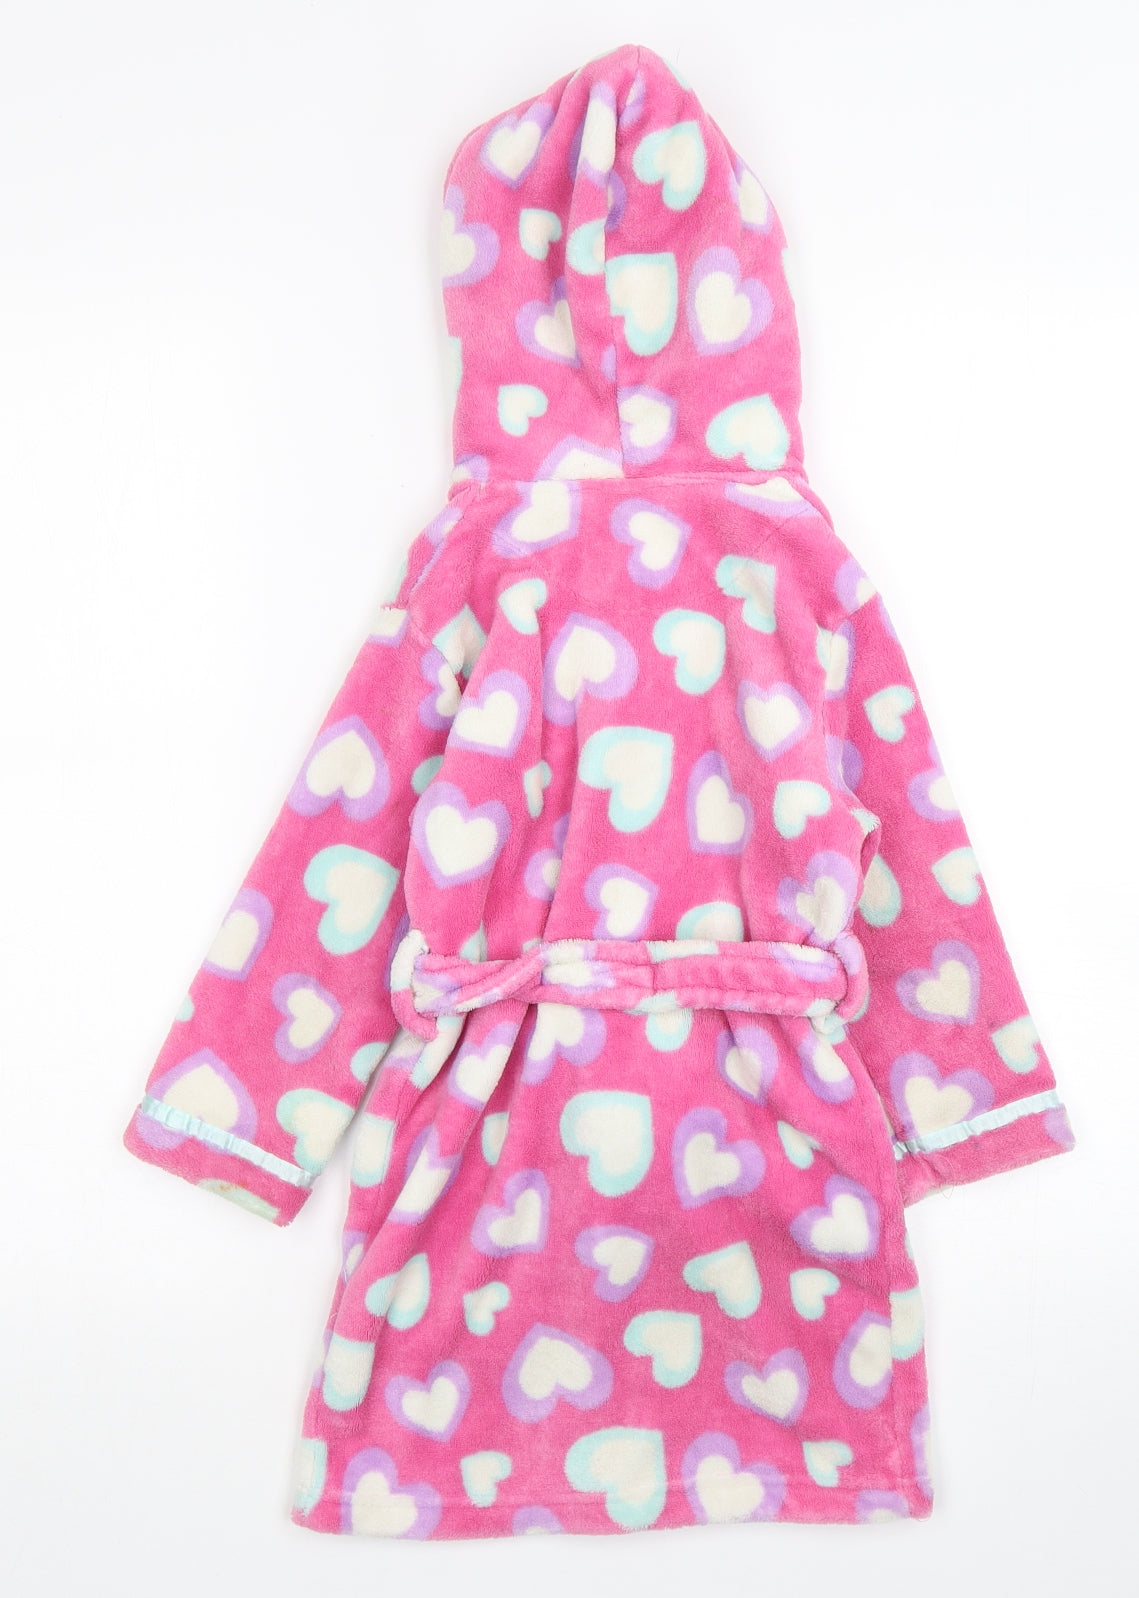 BHS Girls Multicoloured Geometric Polyester Top Gown Size 3-4 Years   - Heart pattern